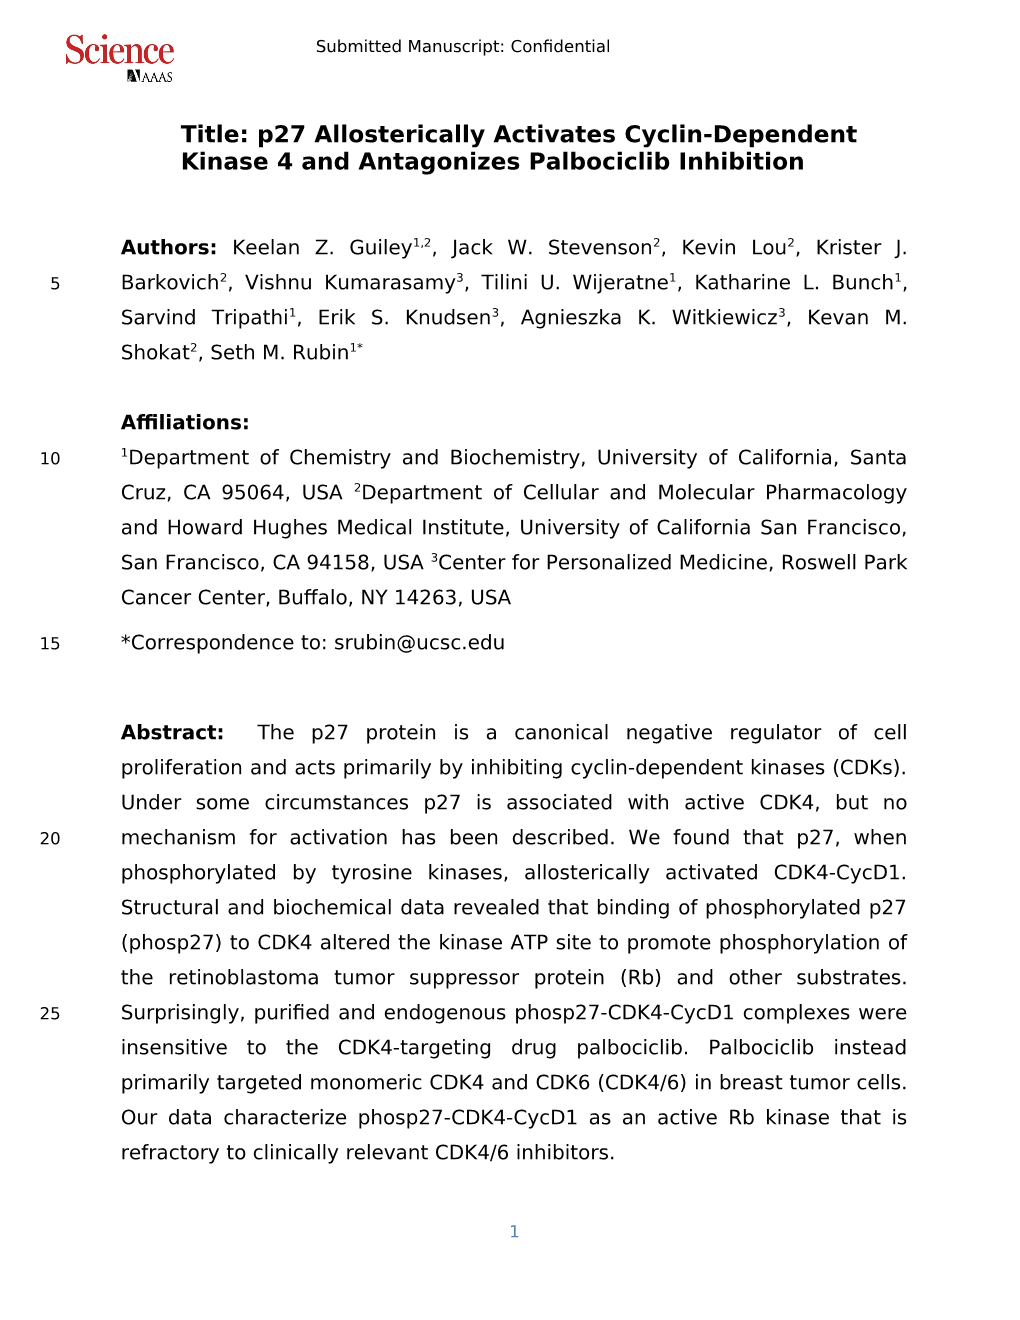 Title: P27 Allosterically Activates Cyclin-Dependent Kinase 4 and Antagonizes Palbociclib Inhibition